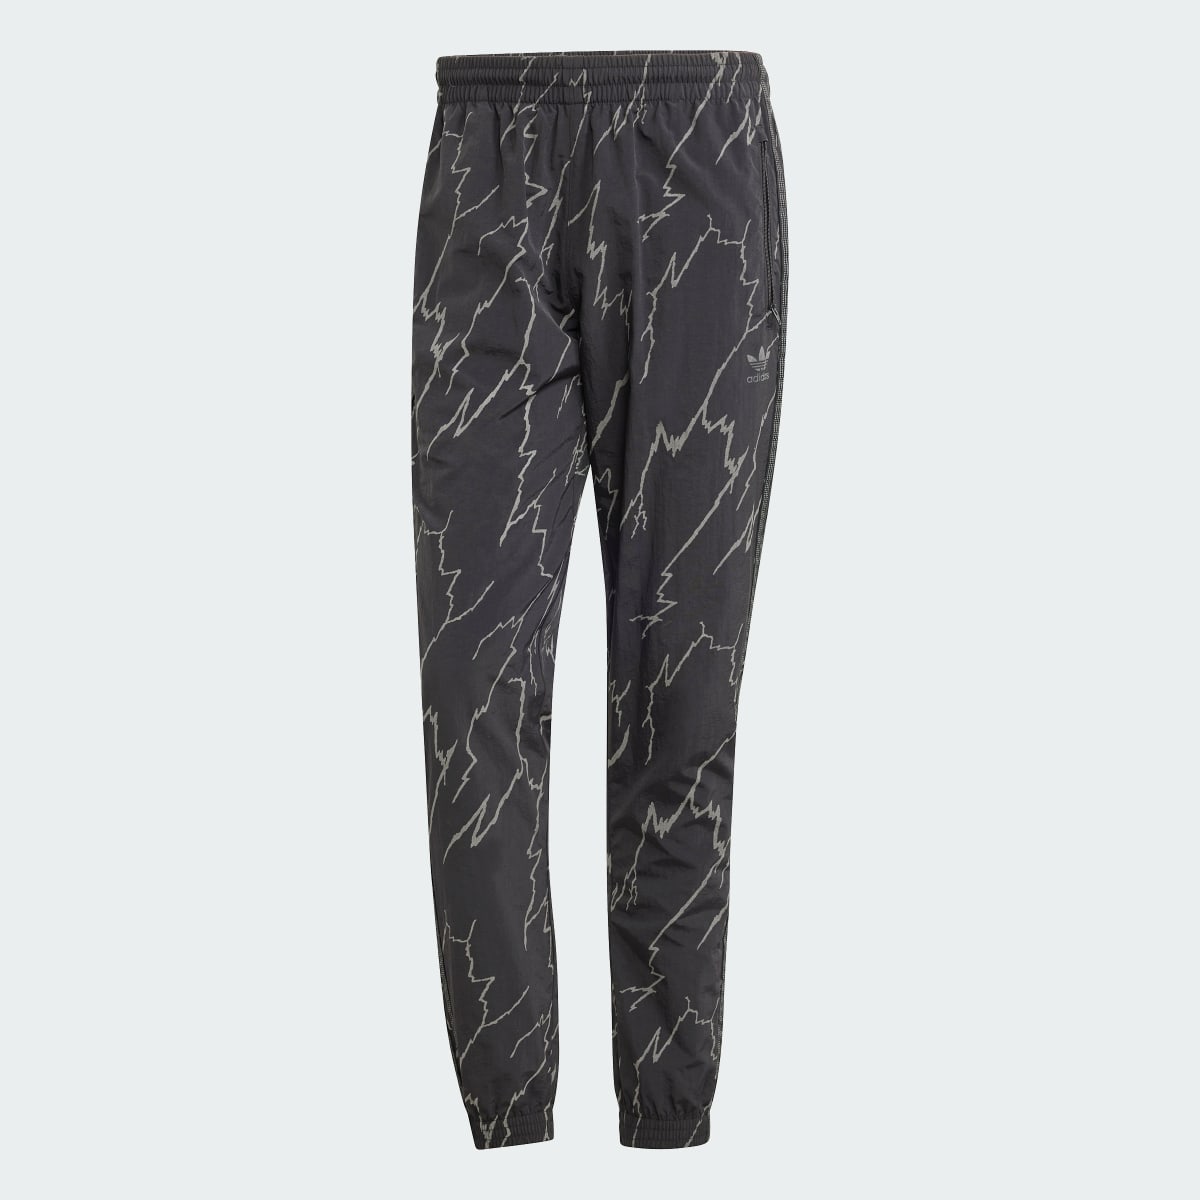 Adidas Allover Print SST Track Tracksuit Bottoms. 5